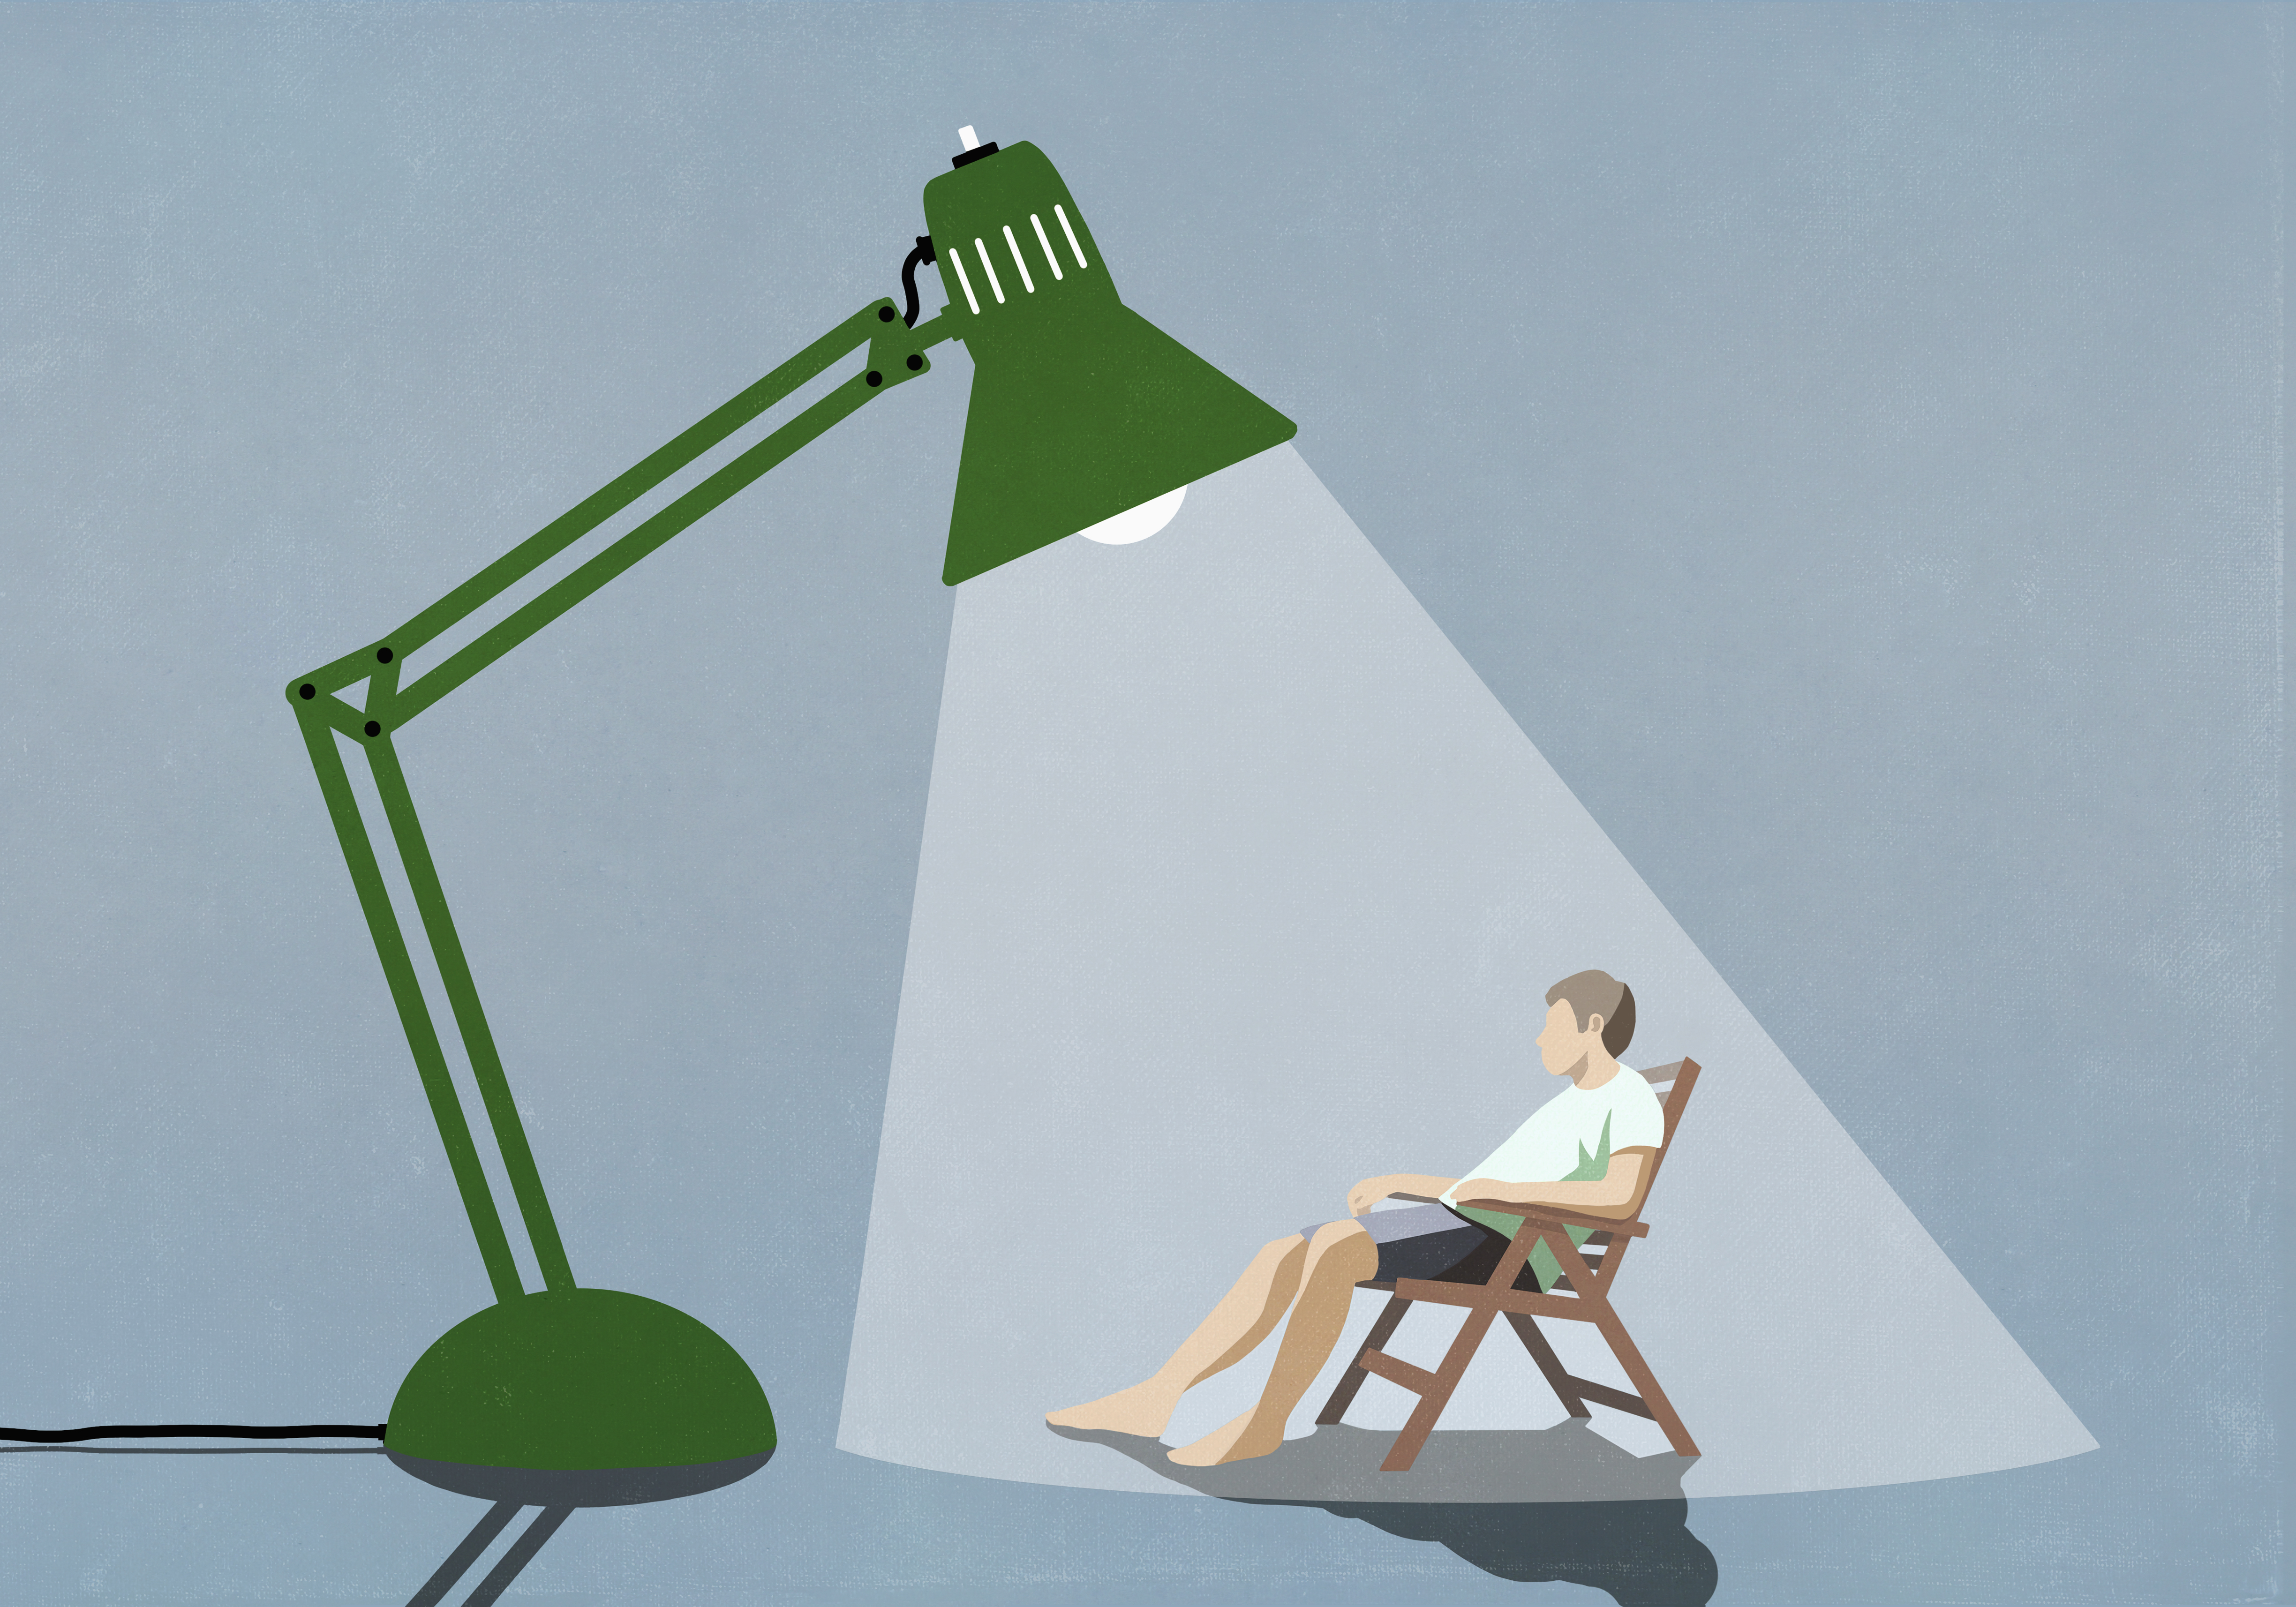 An illustration of a man sitting in a beach chair basking in the light under a giant green articulated desk lamp.